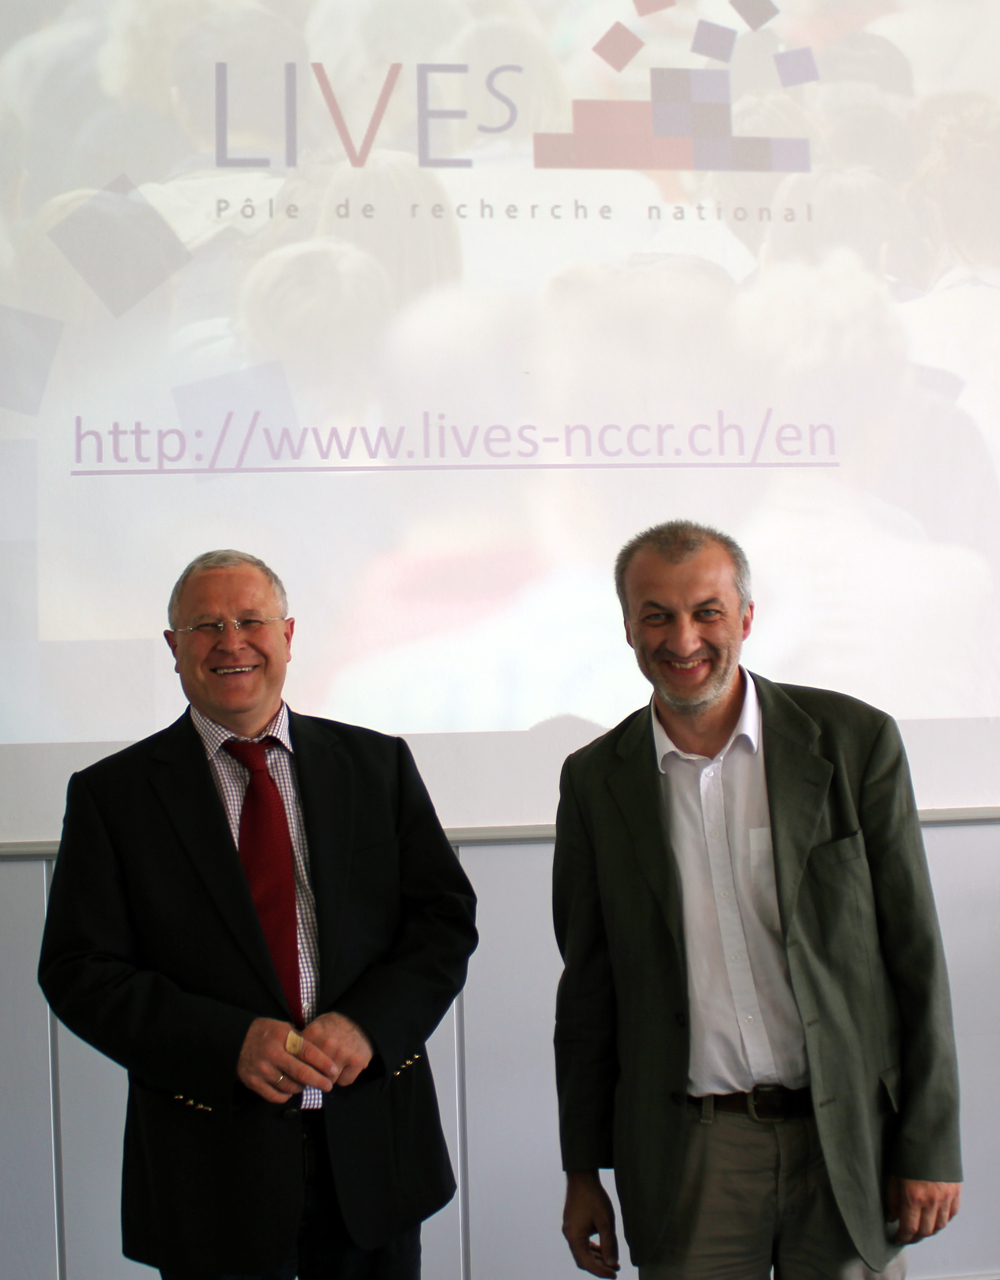 In the photo (from left to right): Prof. Dr. Dr. h.c. Hans-Peter Blossfeld, Prof. Dr. Dario Spini